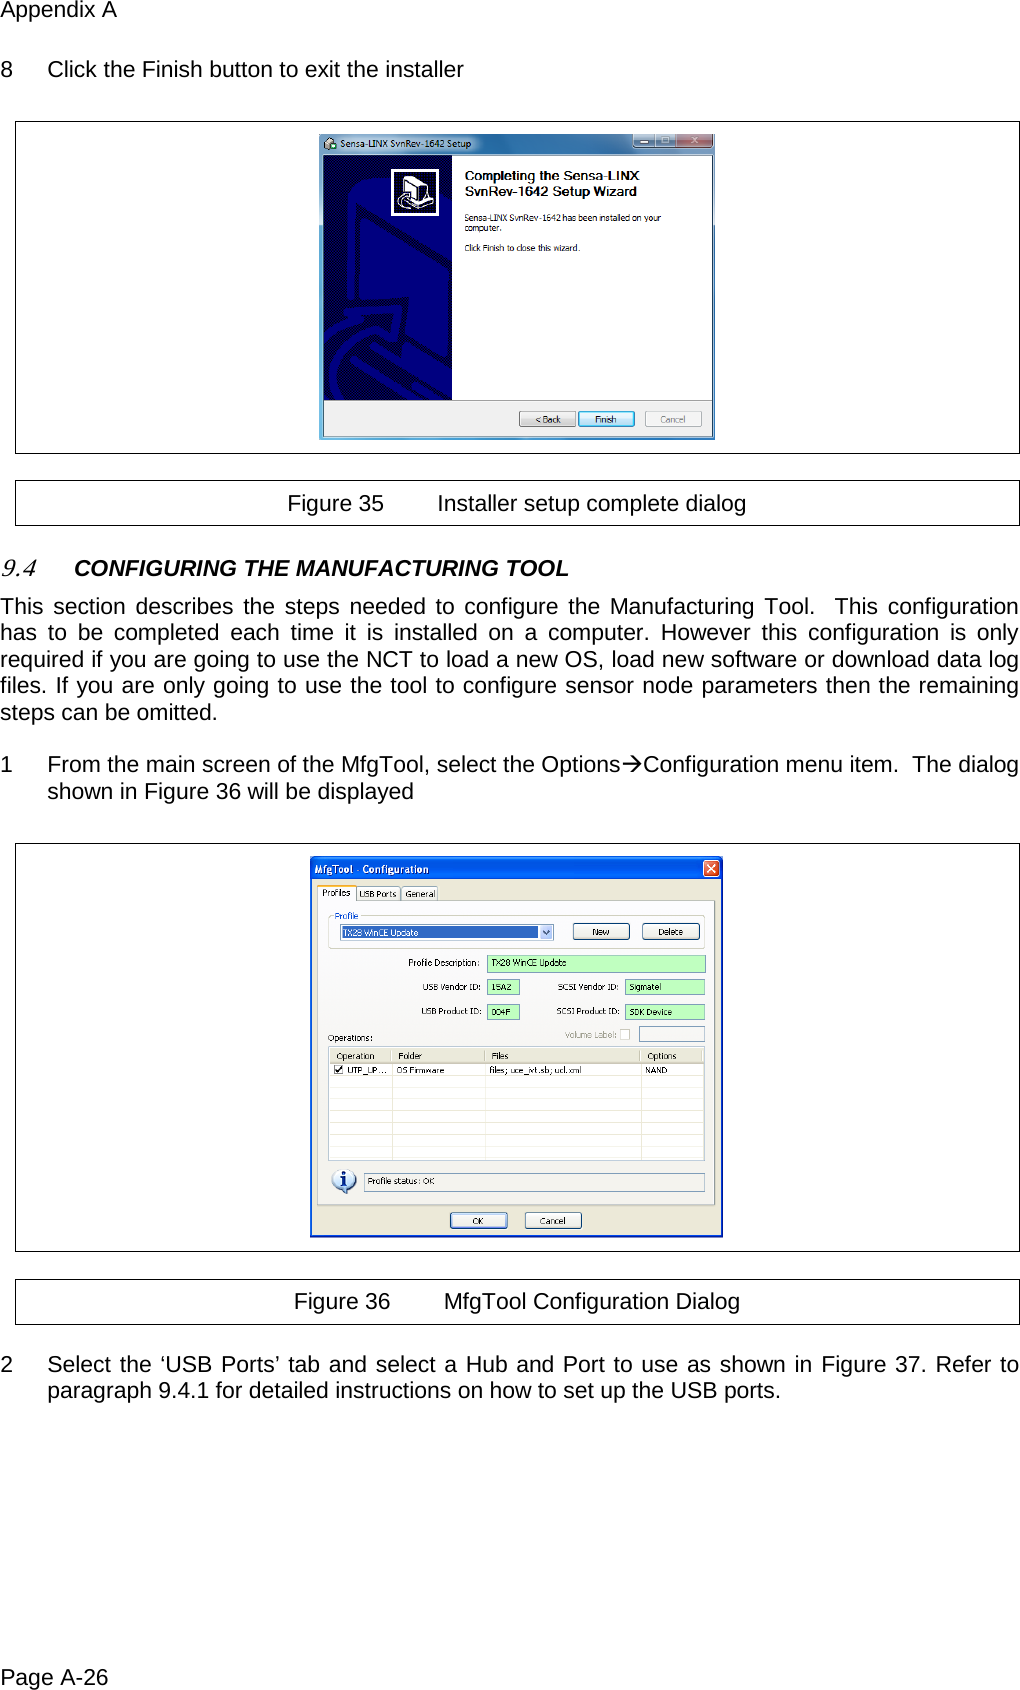 Appendix A Page A-26 8  Click the Finish button to exit the installer    Figure 35 Installer setup complete dialog  9.4 CONFIGURING THE MANUFACTURING TOOL This section describes the steps needed to configure the Manufacturing Tool.  This configuration has to be completed each time it is installed on a computer. However this configuration is only required if you are going to use the NCT to load a new OS, load new software or download data log files. If you are only going to use the tool to configure sensor node parameters then the remaining steps can be omitted.  1  From the main screen of the MfgTool, select the OptionsConfiguration menu item.  The dialog shown in Figure 36 will be displayed    Figure 36 MfgTool Configuration Dialog  2  Select the ‘USB Ports’ tab and select a Hub and Port to use as shown in Figure 37. Refer to paragraph 9.4.1 for detailed instructions on how to set up the USB ports.   